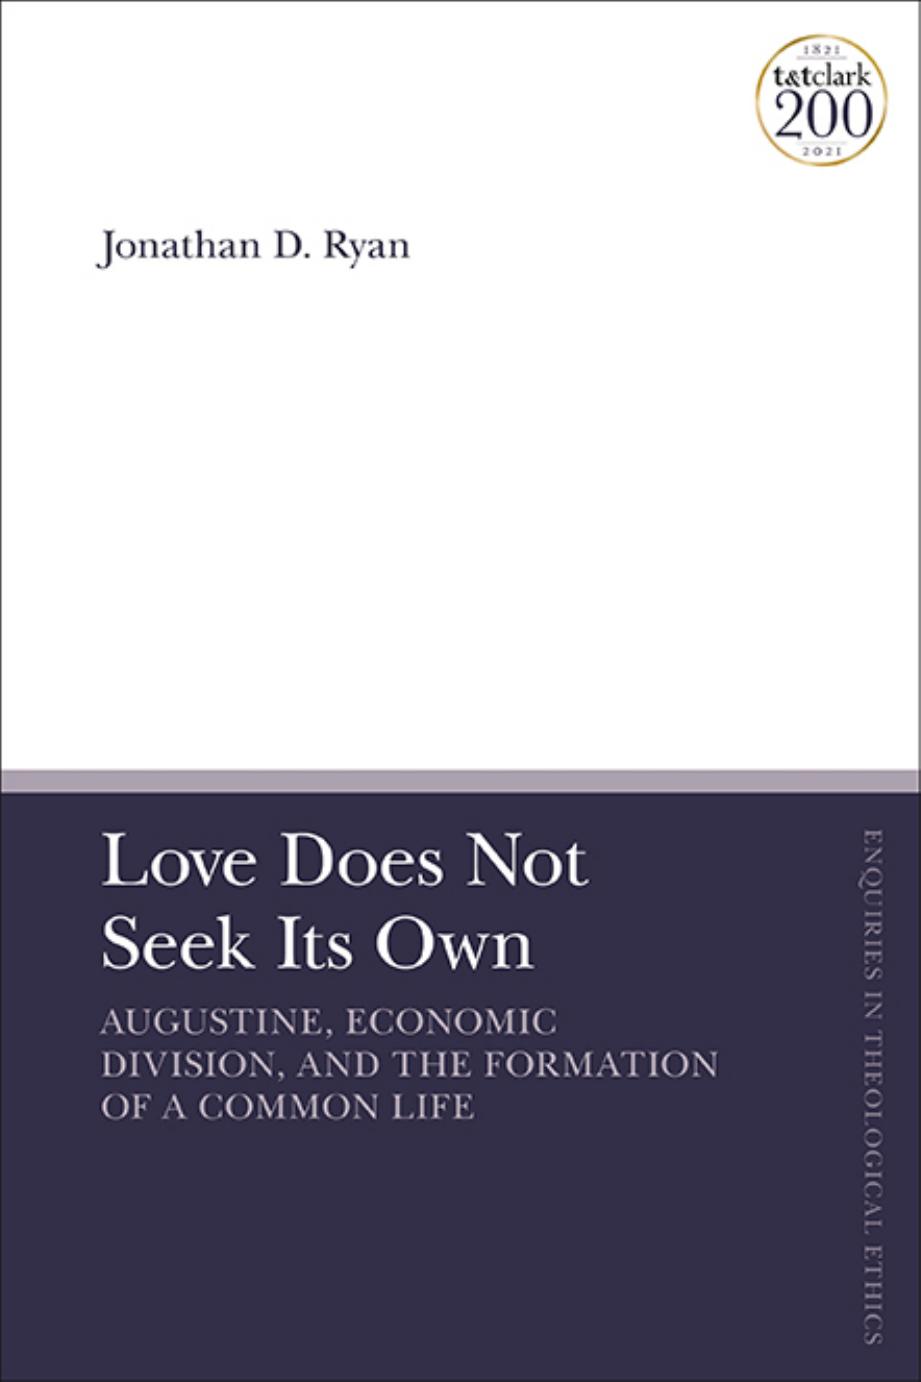 Love Does Not Seek Its Own: Augustine, Economic Division, and the Formation of a Common Life by Jonathan D. Ryan